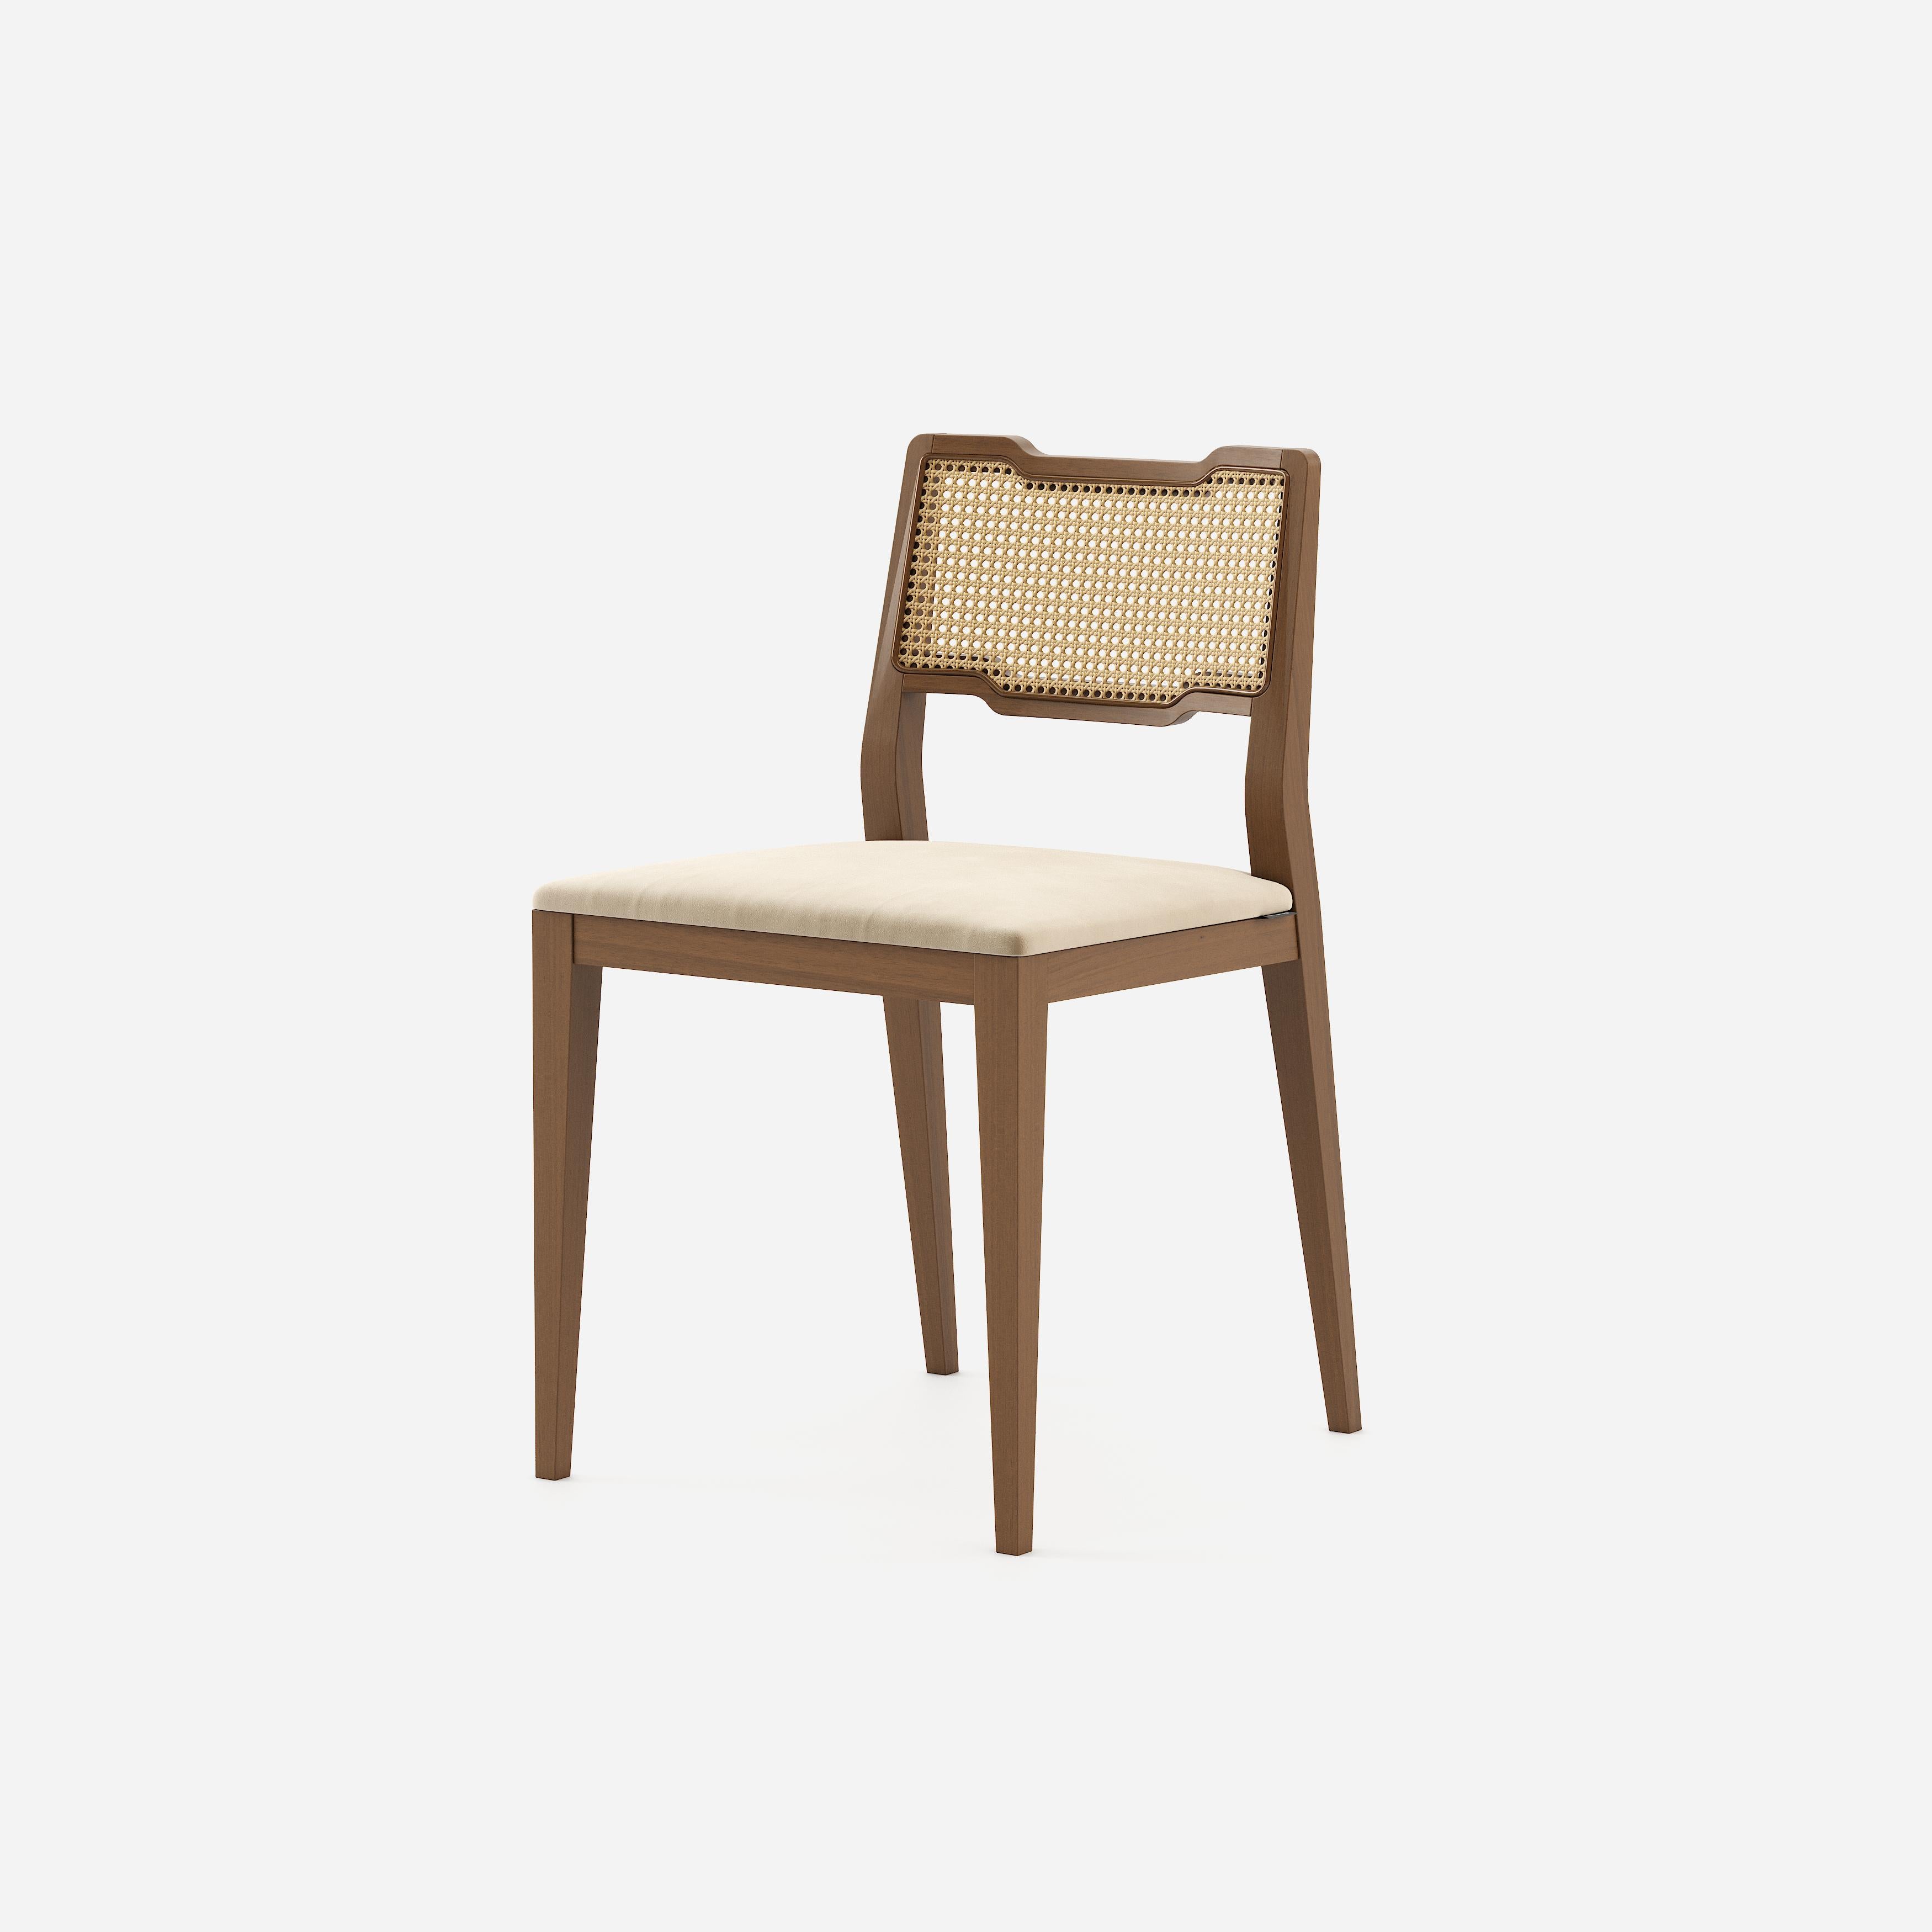 Modern Contemporary Rattan Dining Chairs in Walnut Finish, Set of 4. For Sale